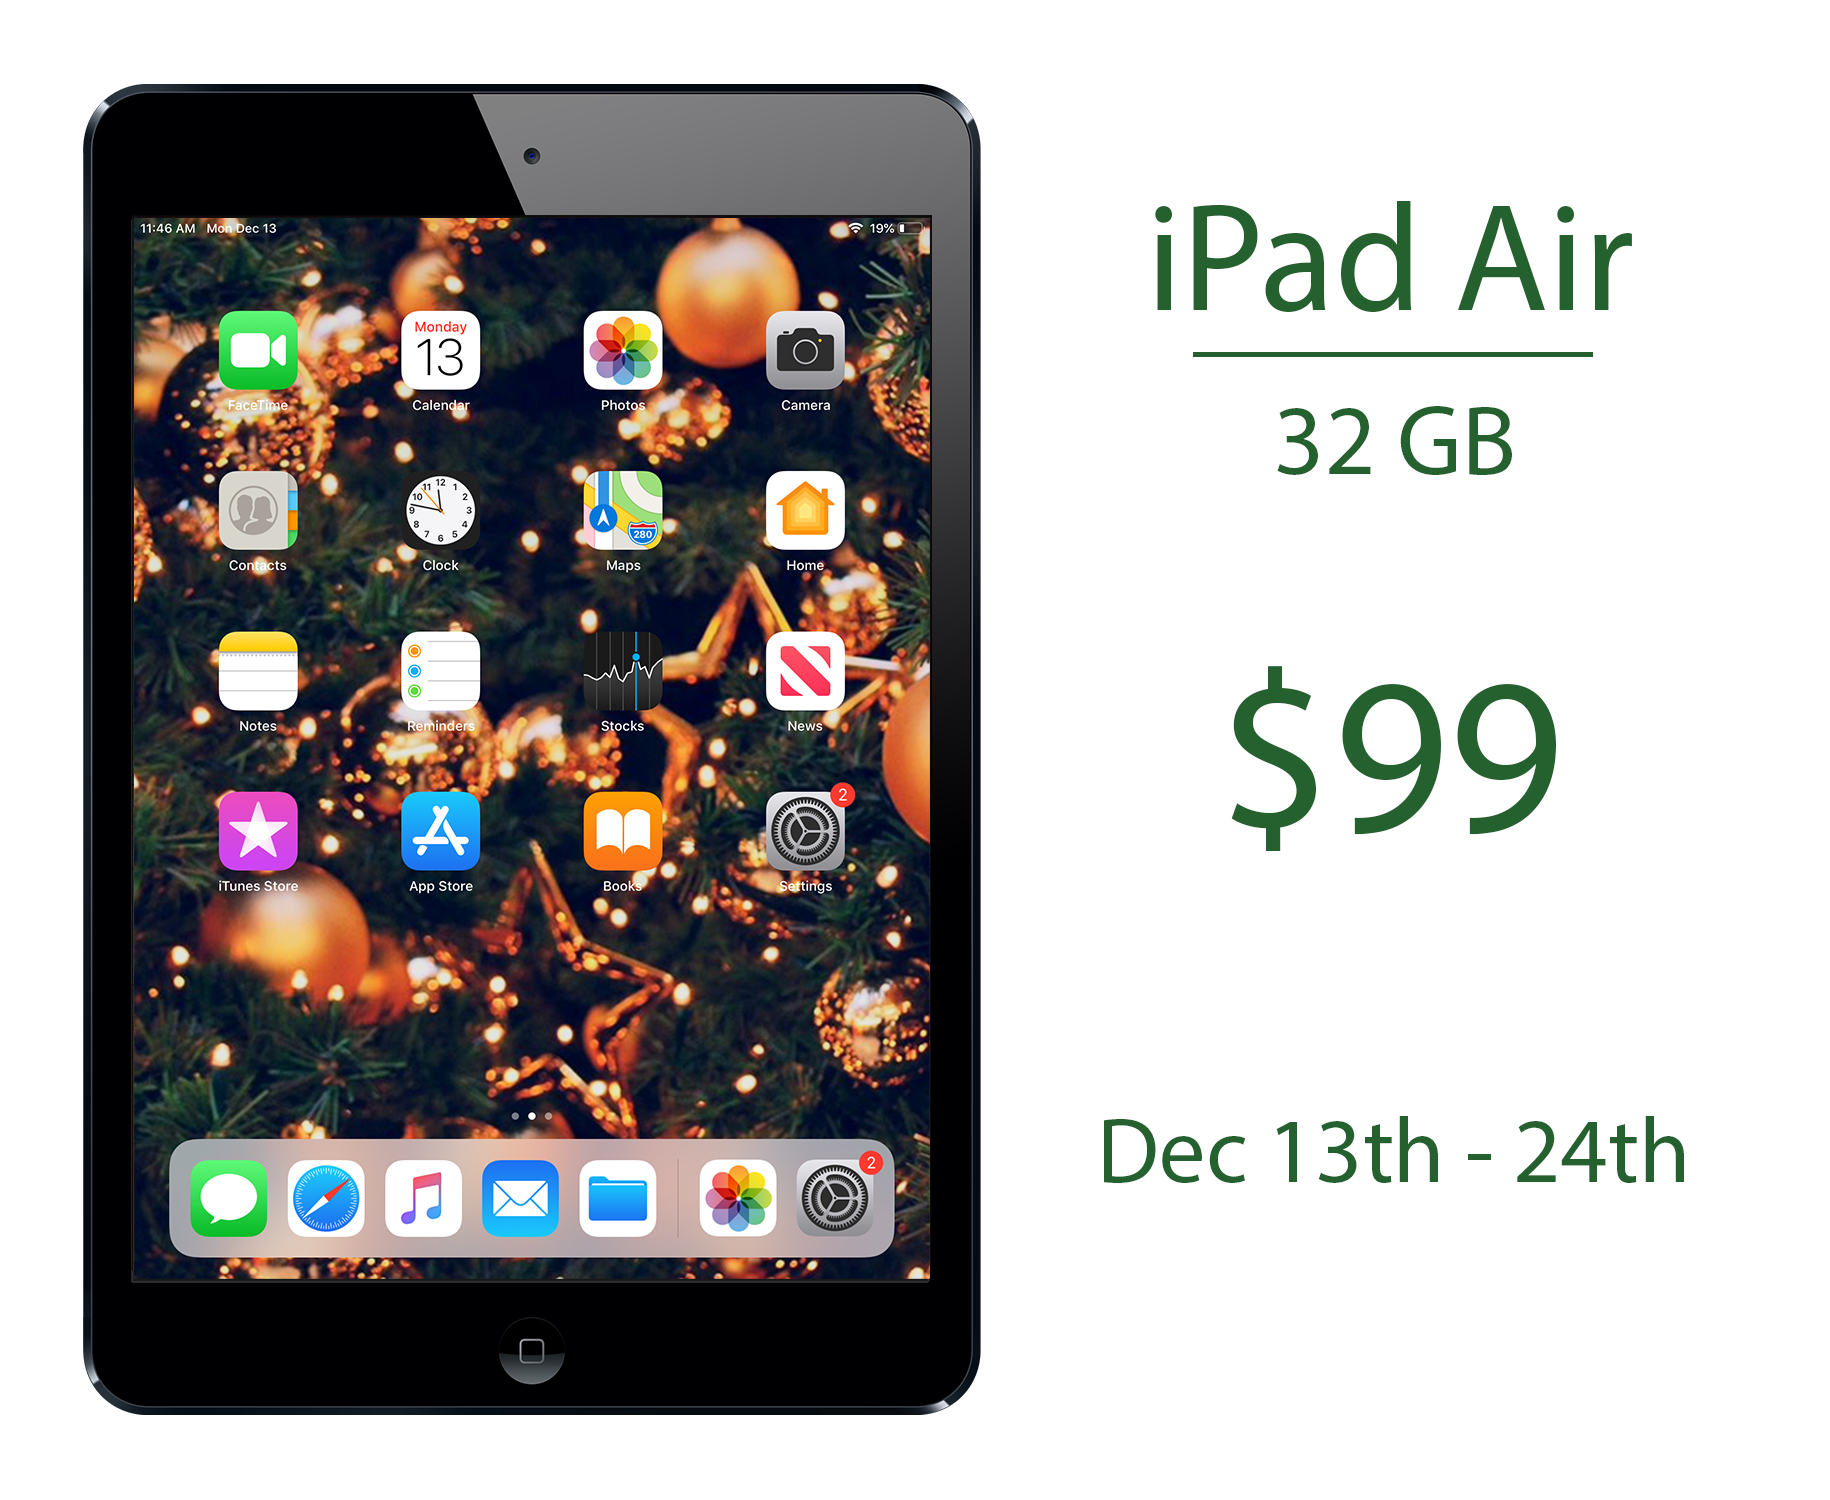 iPad Sale! Buy now and Save!